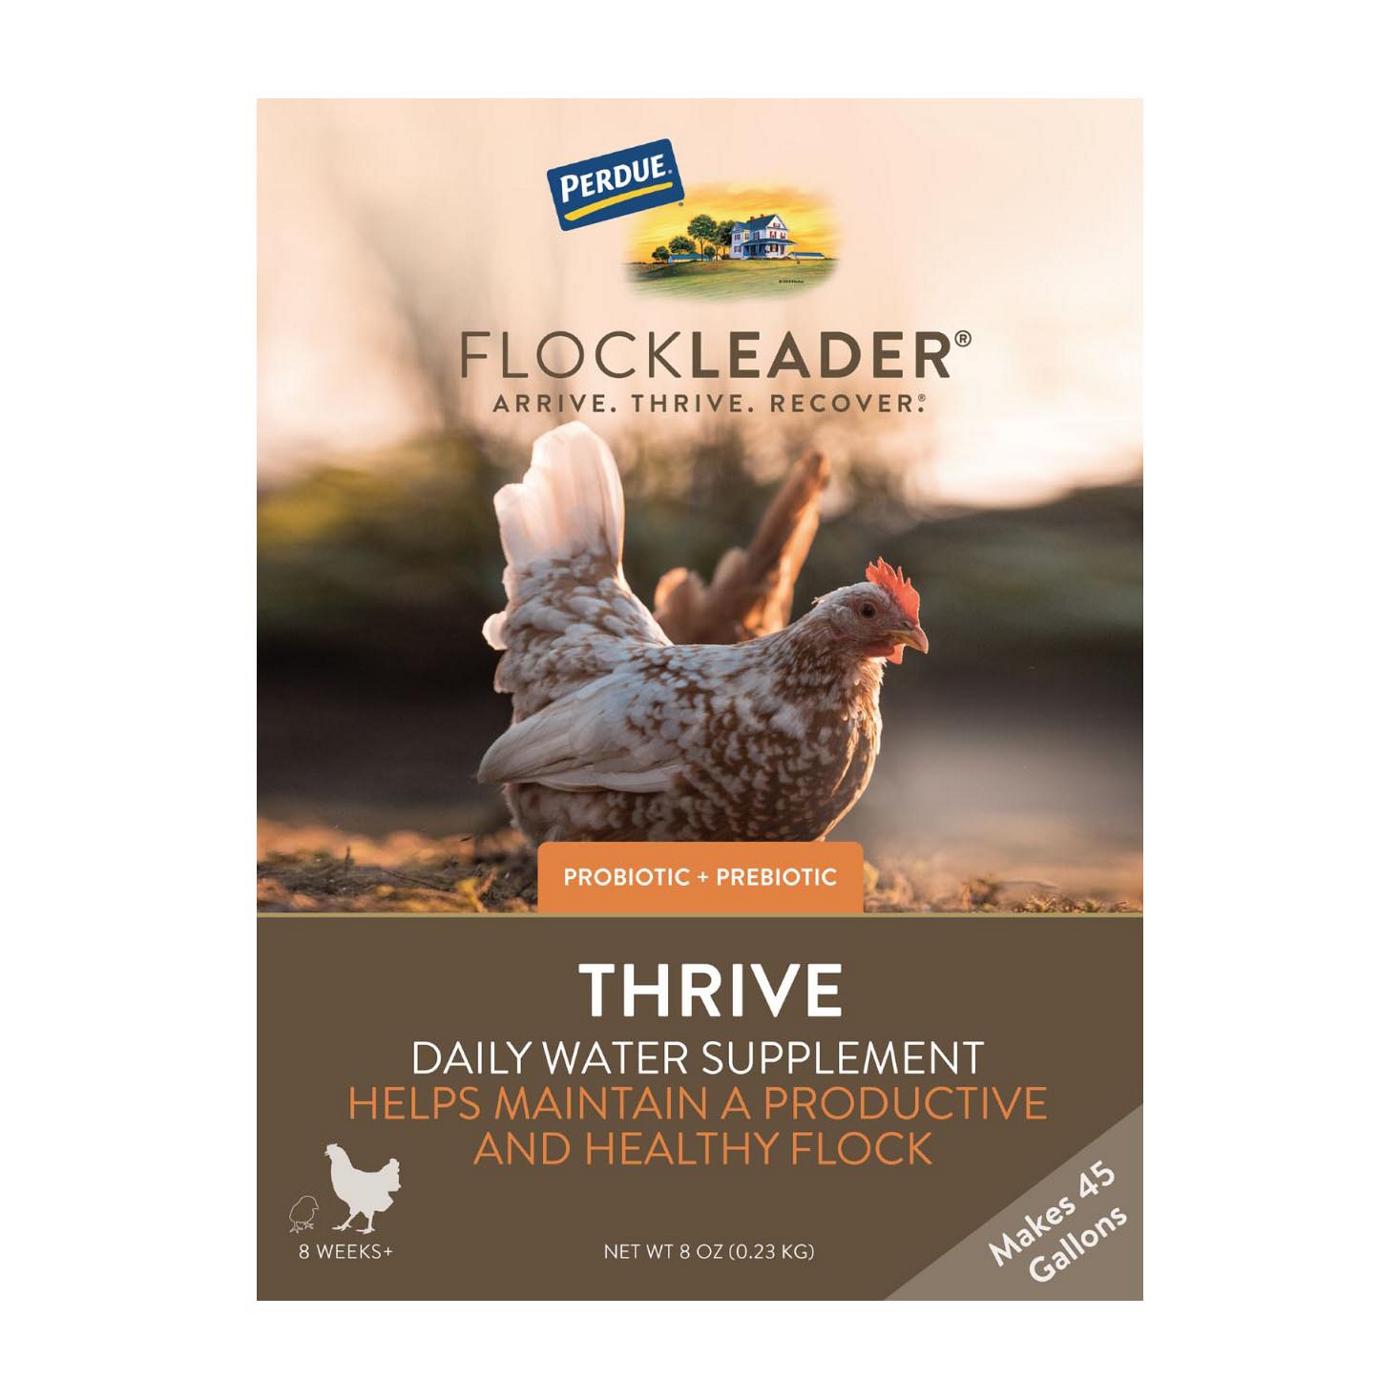 Flockleader Thrive Daily Water Supplement; image 1 of 3